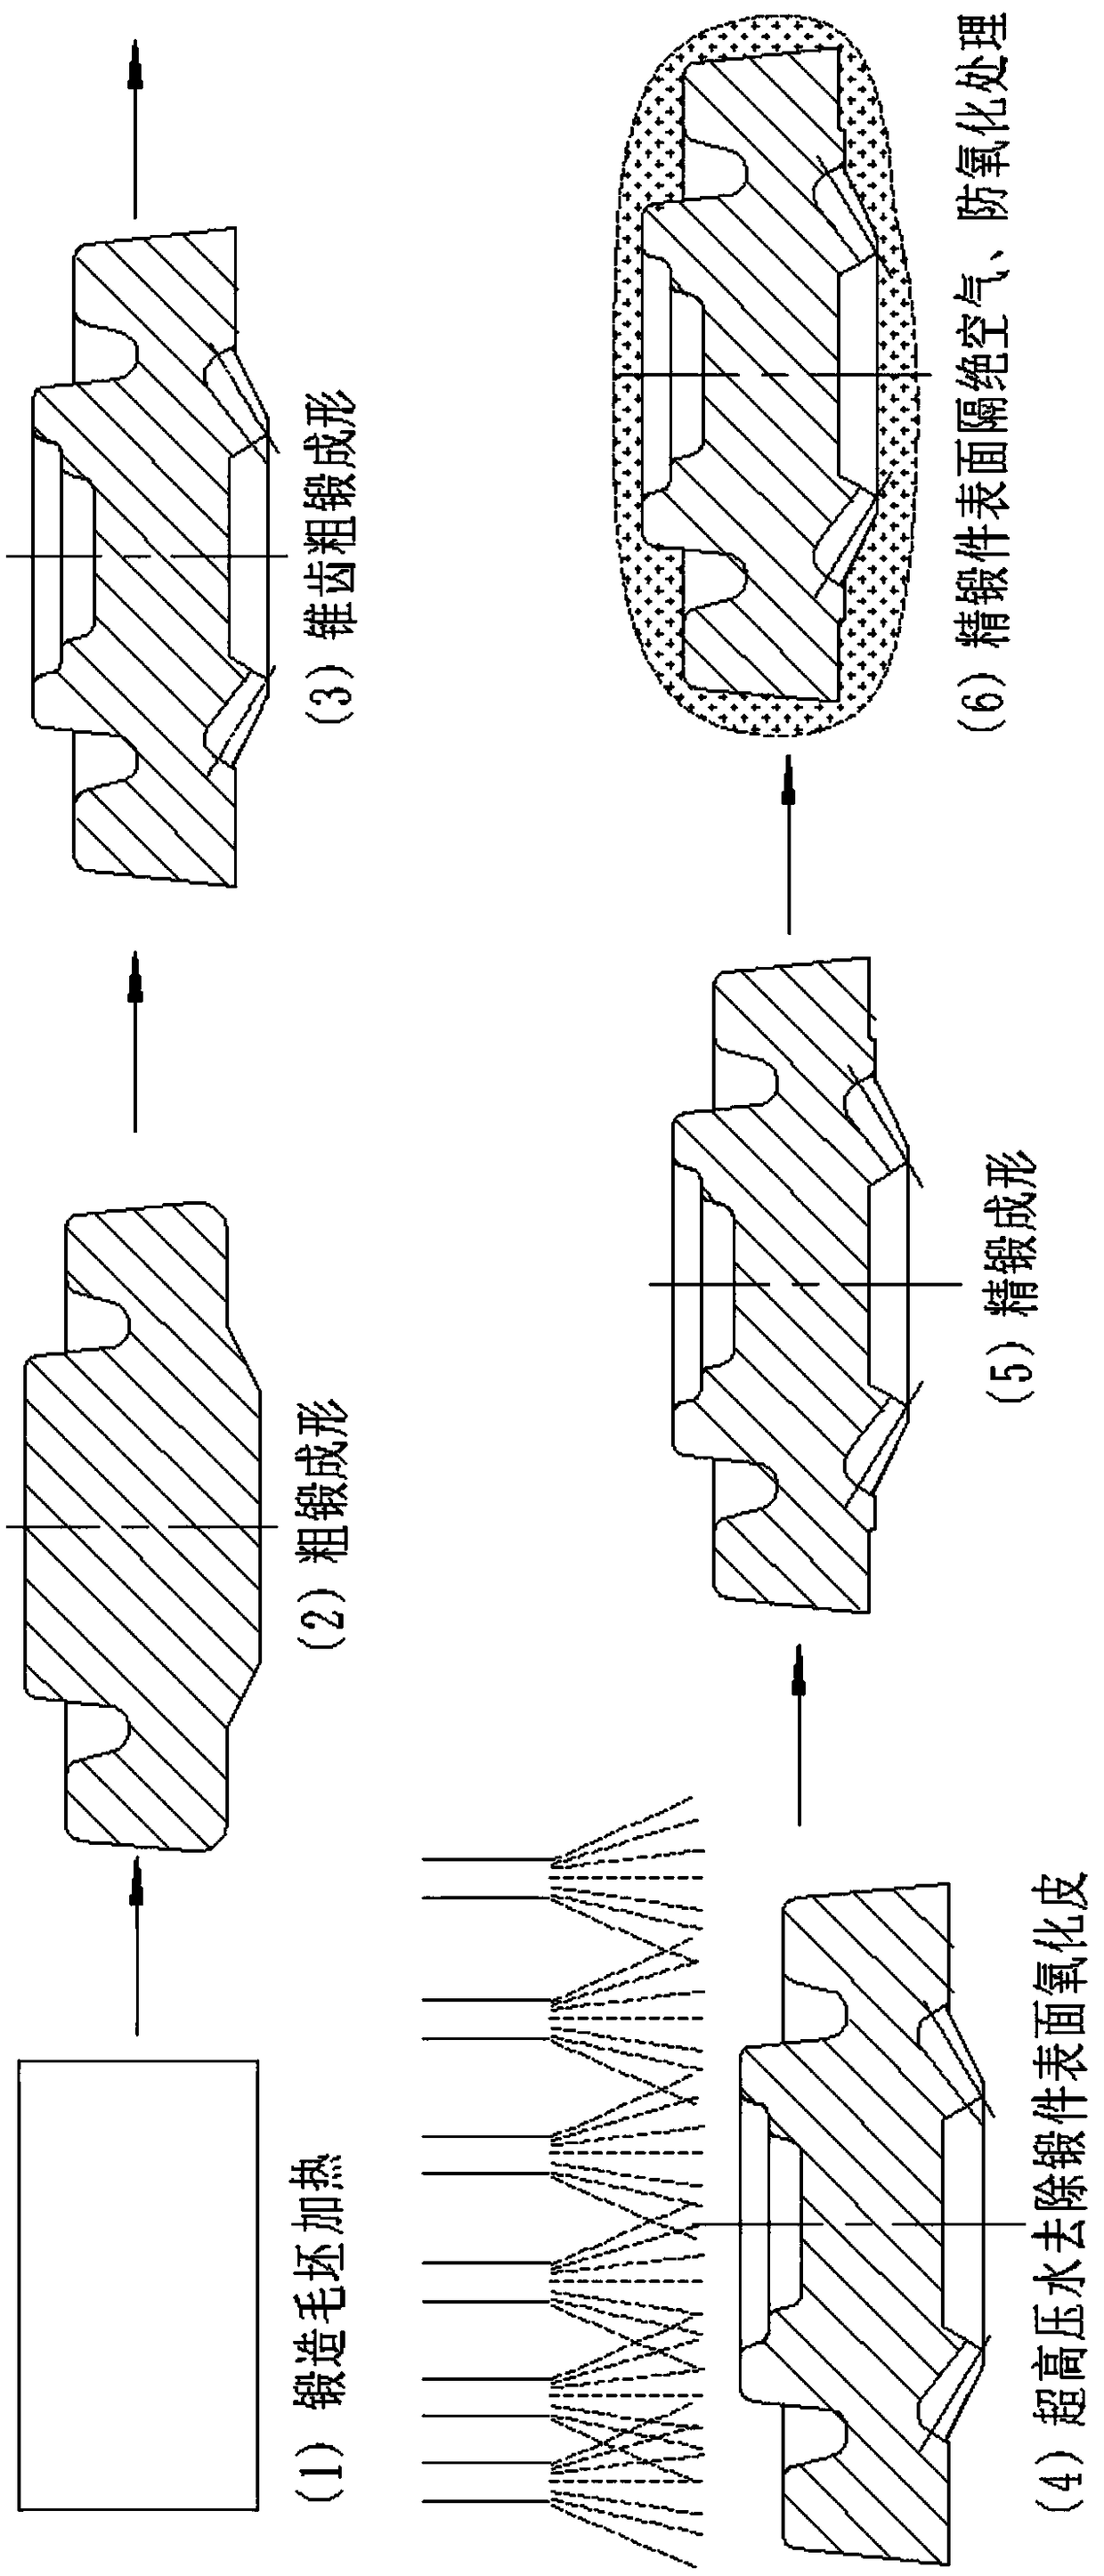 Triple-gear process of one-time heating continuous forging precision forming through bridge